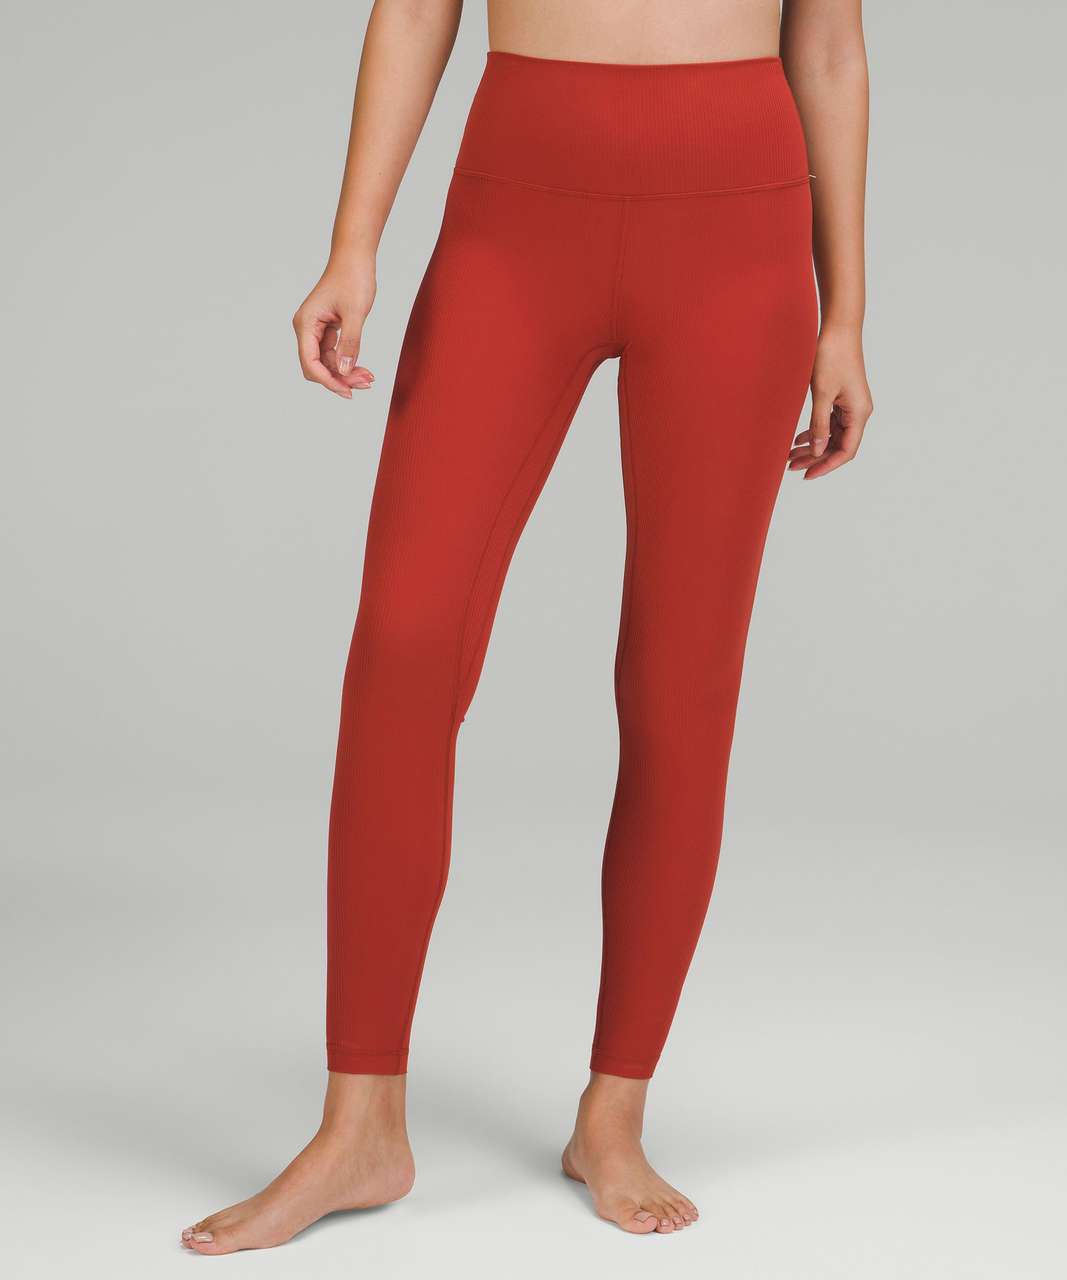 Lululemon Align™ High-Rise Pant 25 Size 6 Carnation Red Double